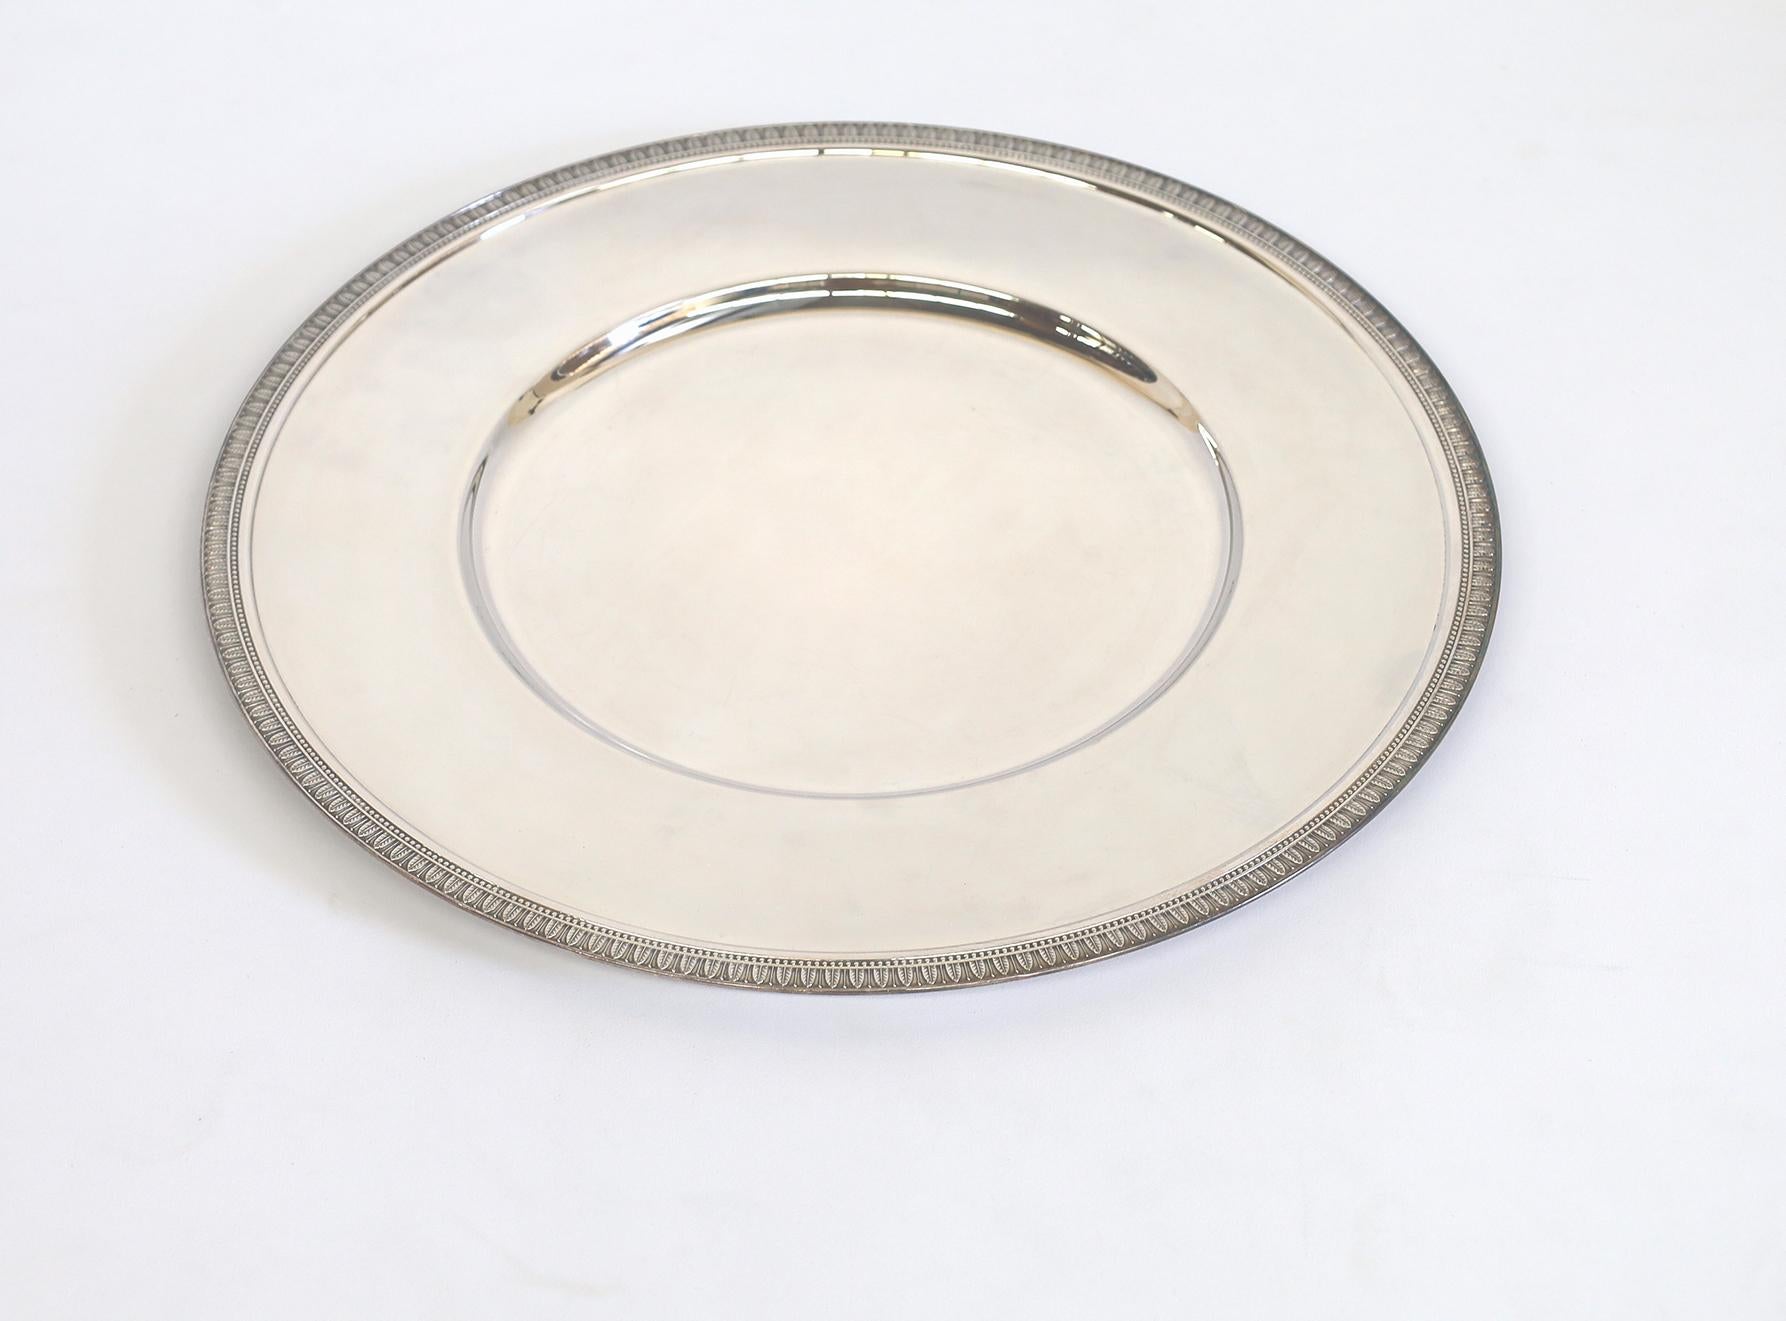 Set a refined and elegant table with a silver plated charger/presentation plate in the Malmaison pattern. It goes under dinner plates for added pop. One of Christofle's most historic patterns, Malmaison typifies the Empire style, with its frieze of